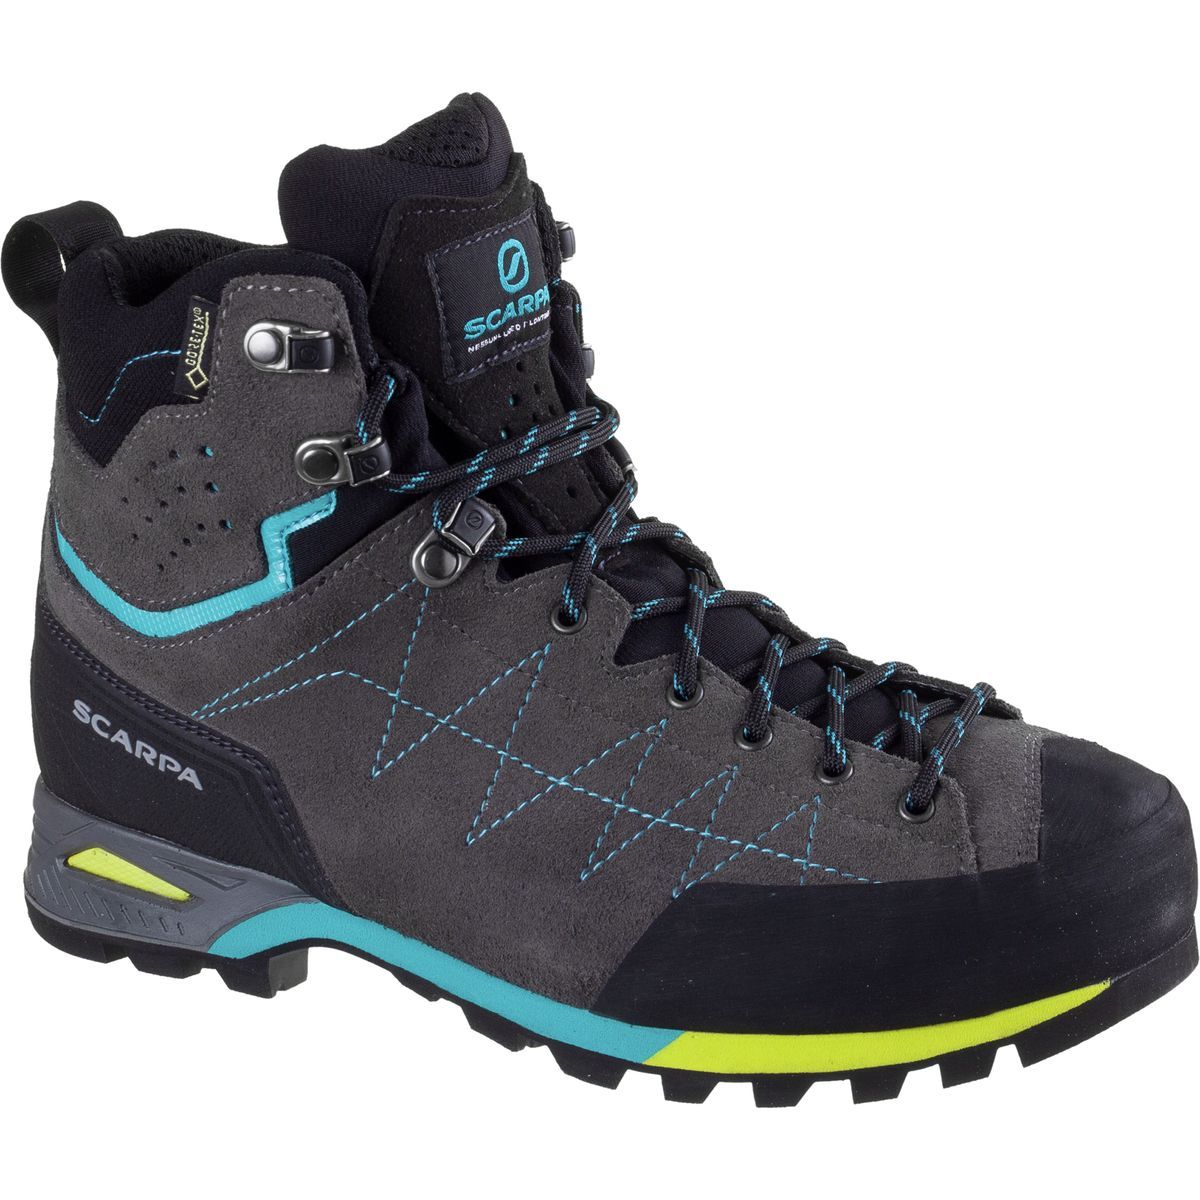 what is the best hiking shoe brand